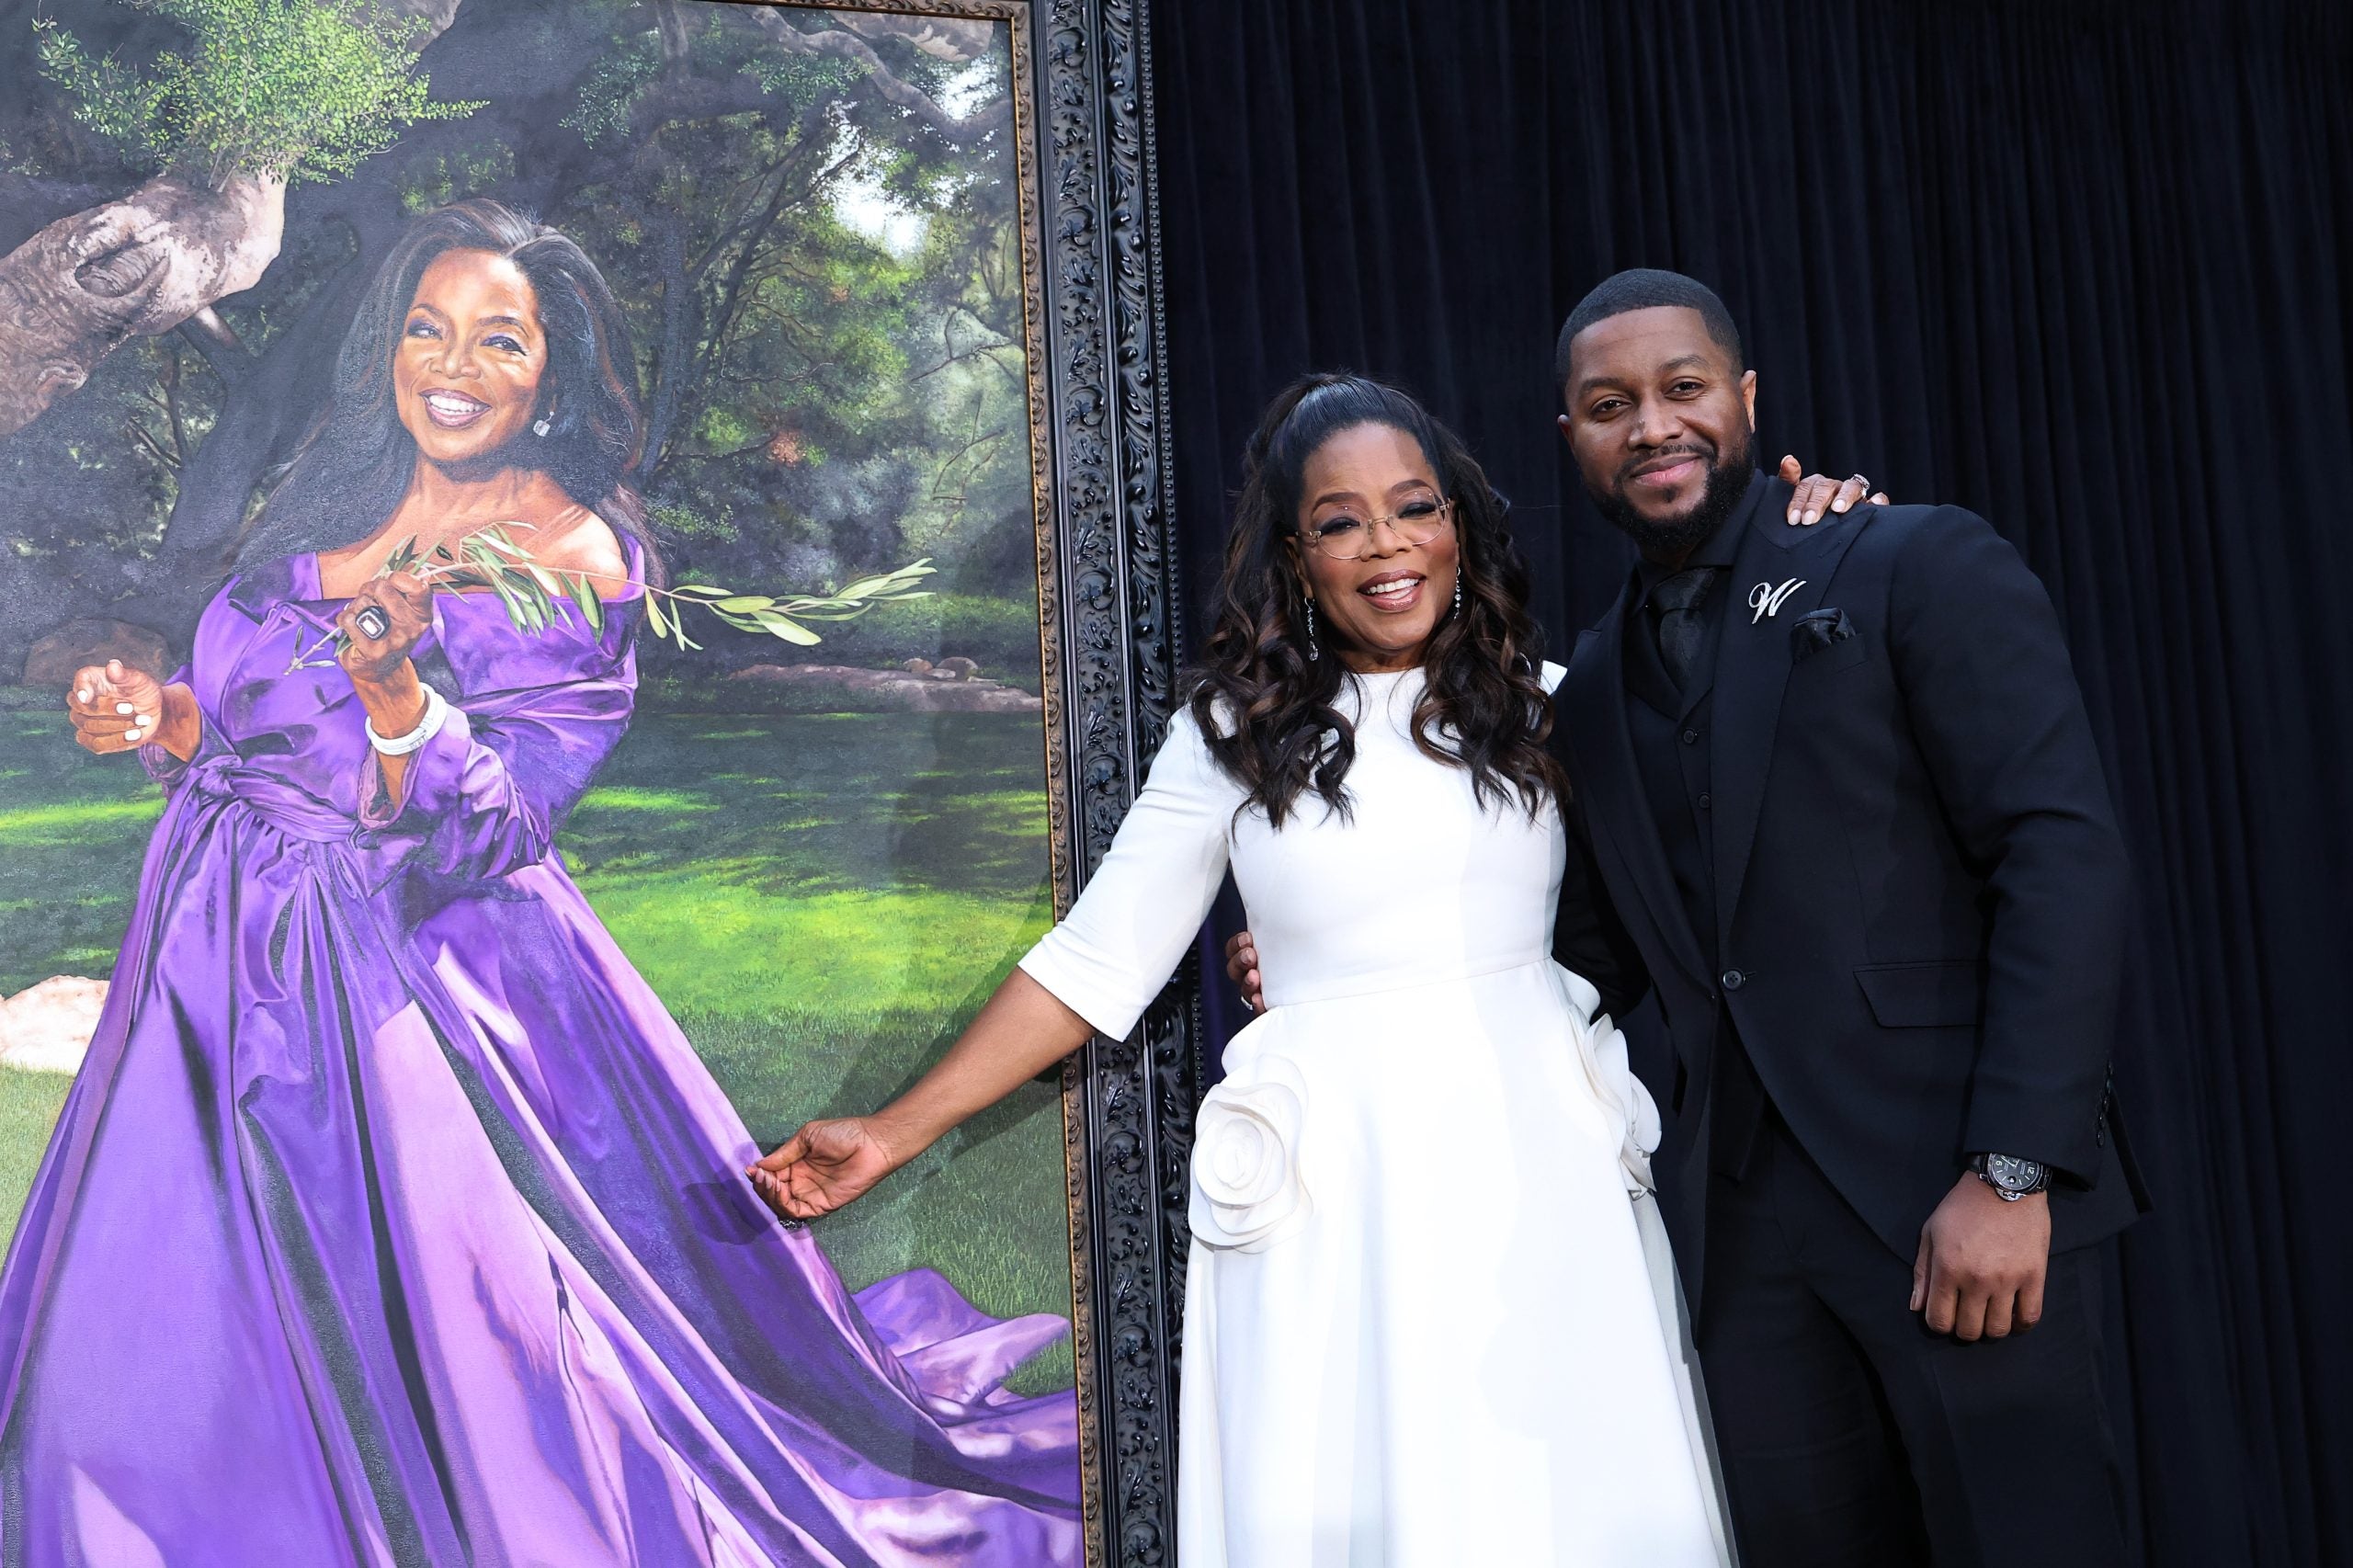 Oprah Winfrey Portrait Unveiled At The Smithsonian’s National Portrait Gallery